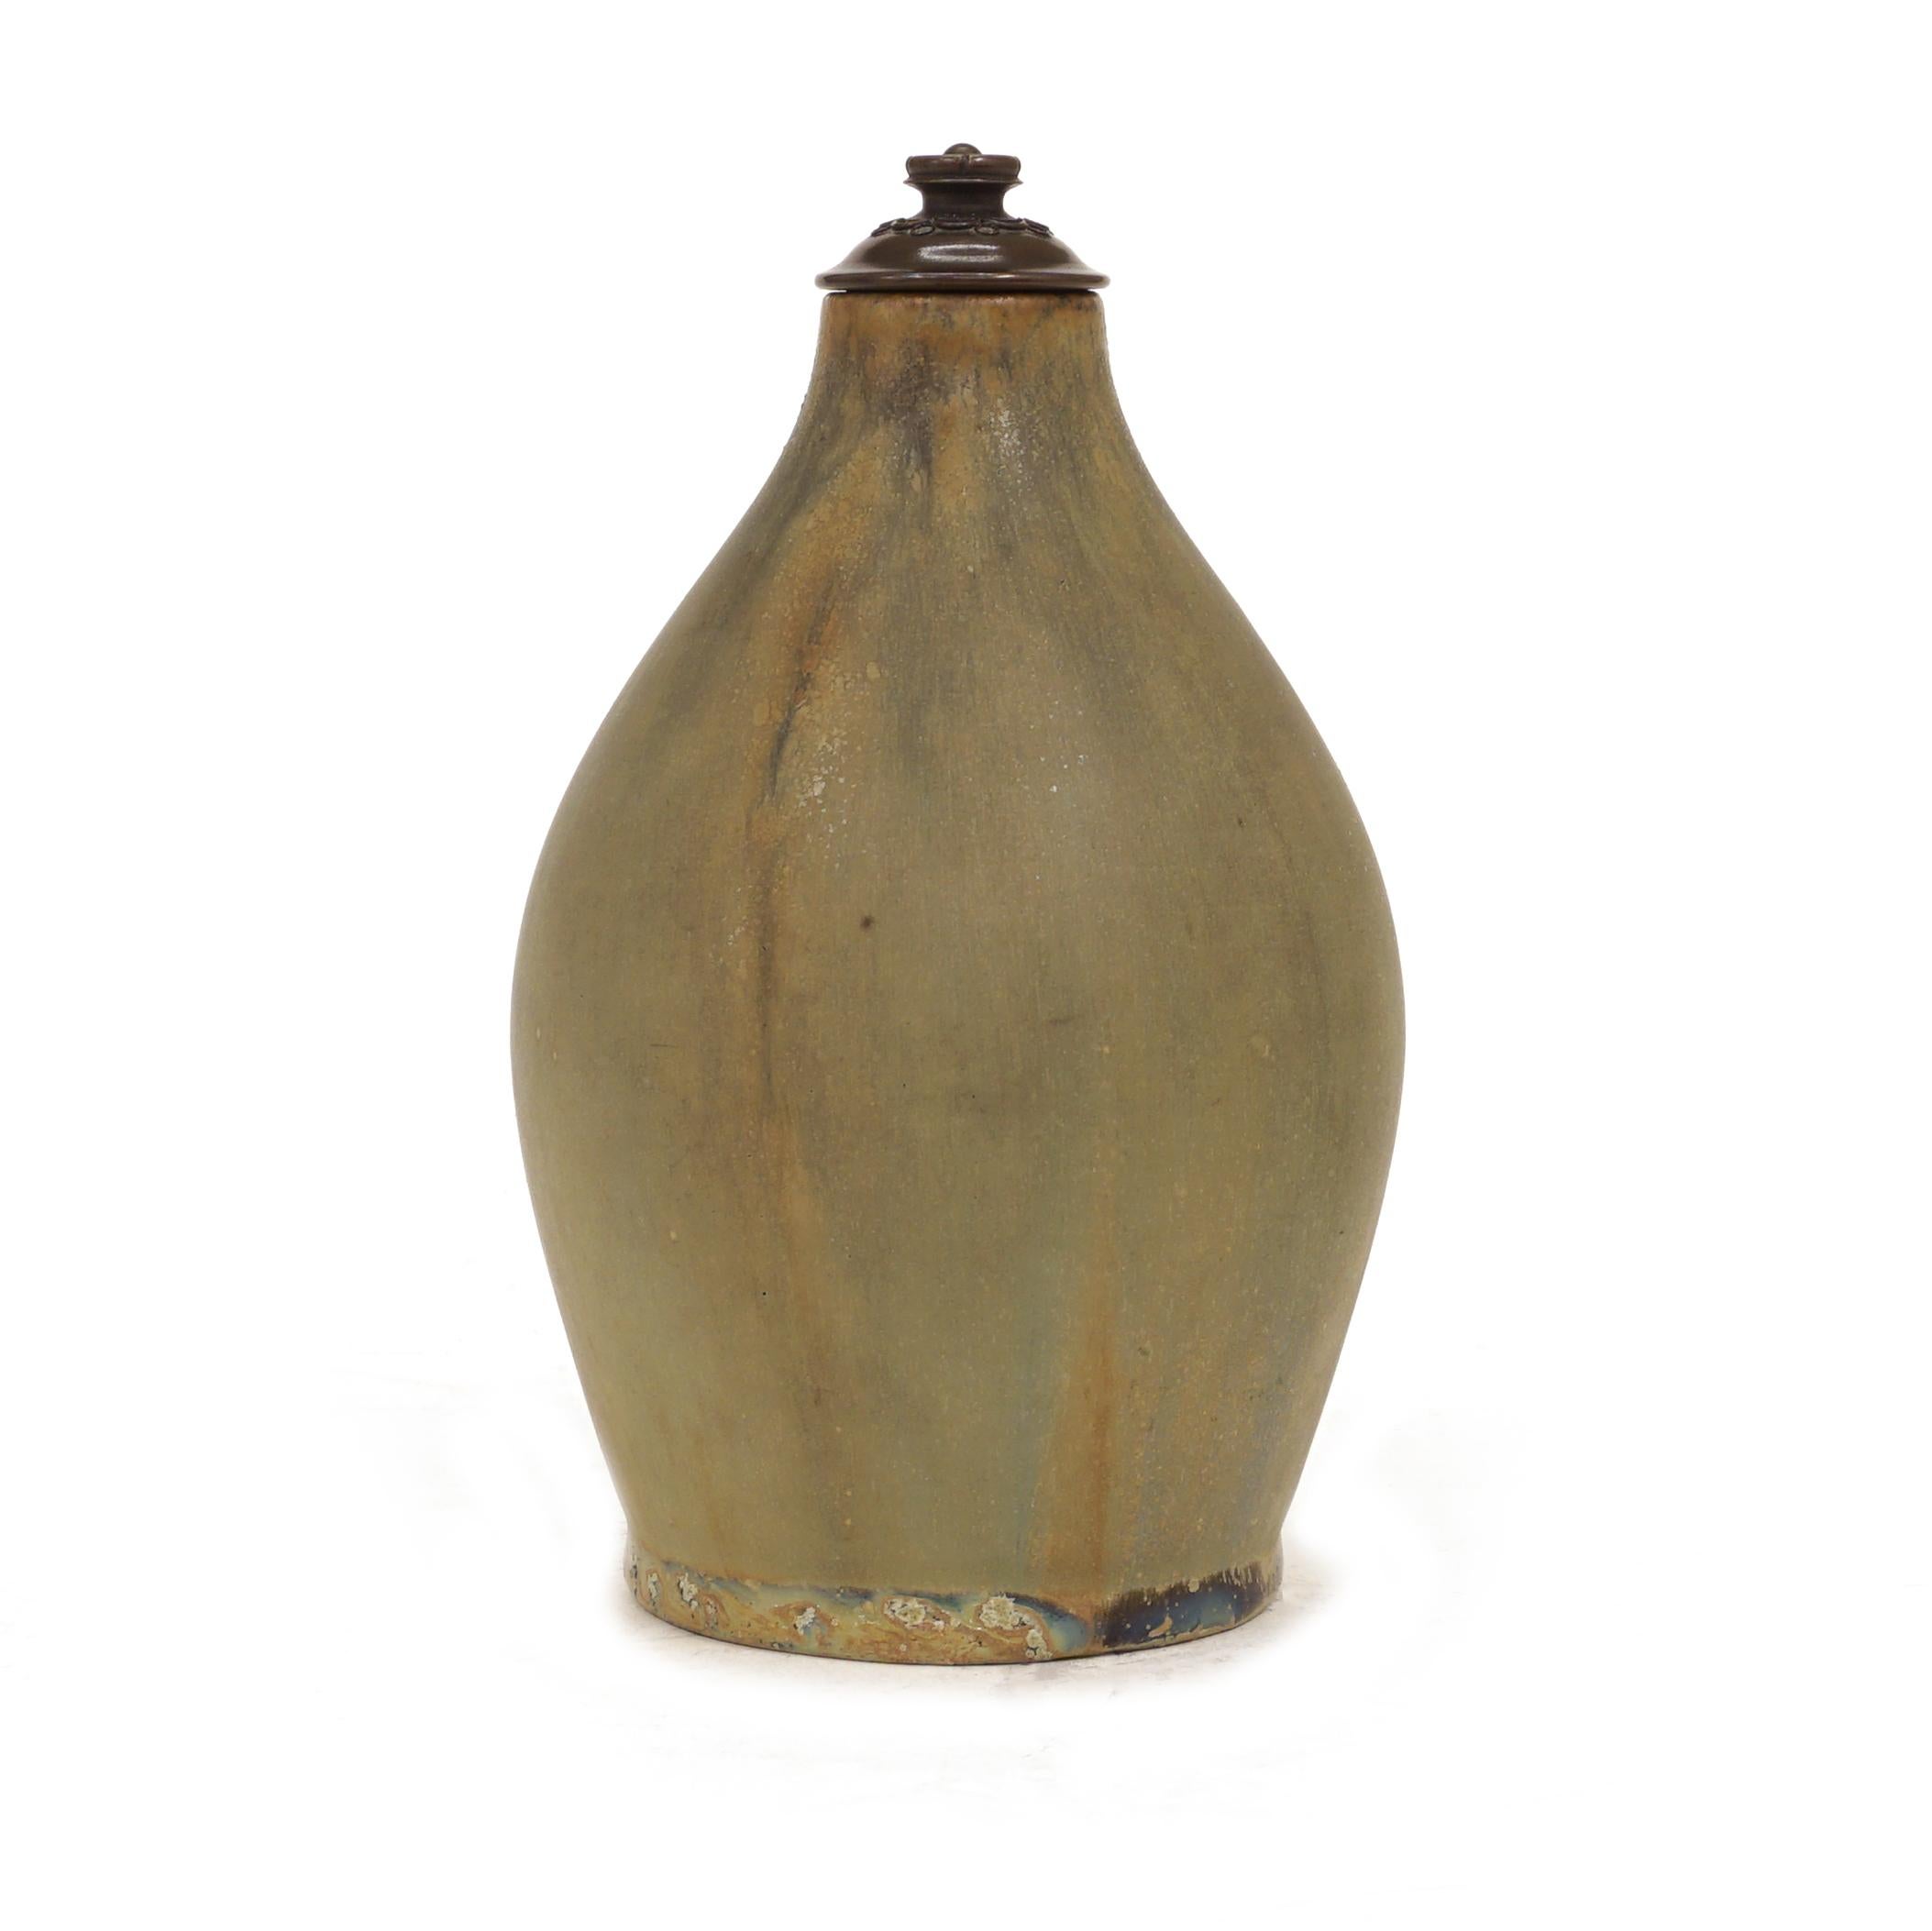 Stoneware vase with cover of patinated bronze. Manufactured by Royal Copenhagen, Copenhagen.
Measure: H: 17,5cm.